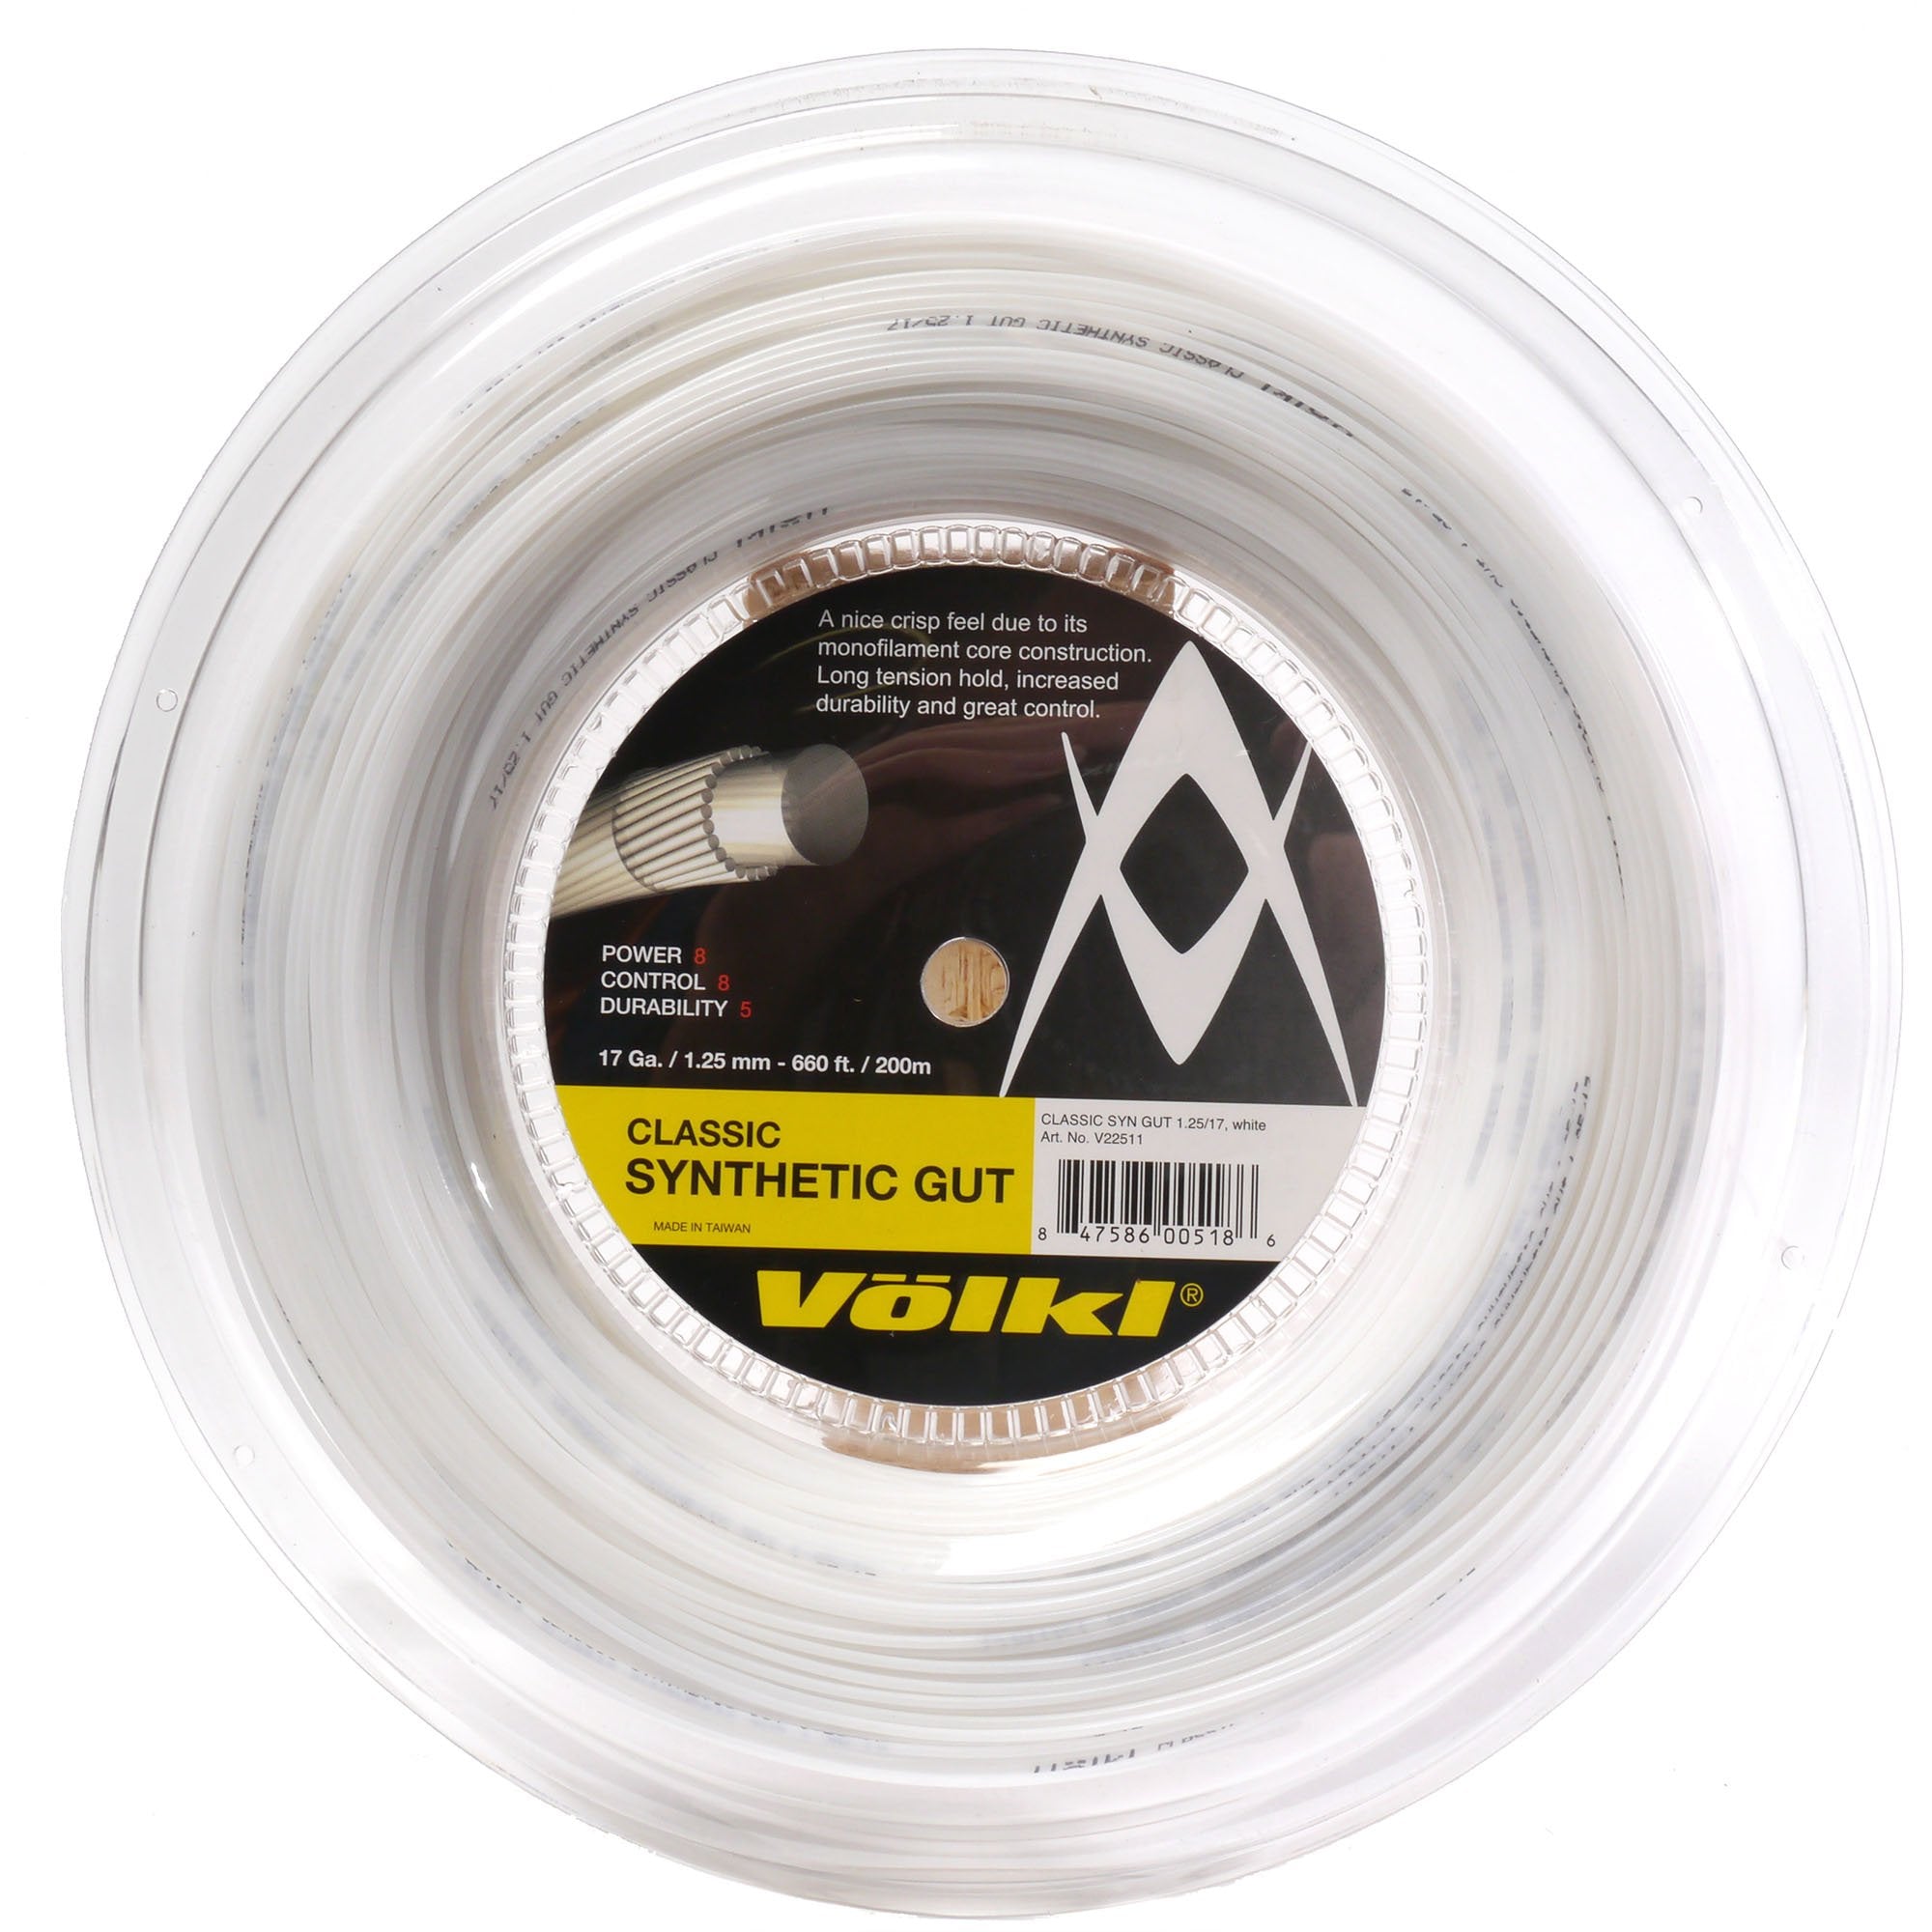 Volkl Classic Synthetic Gut Tennis String - 200m Reel